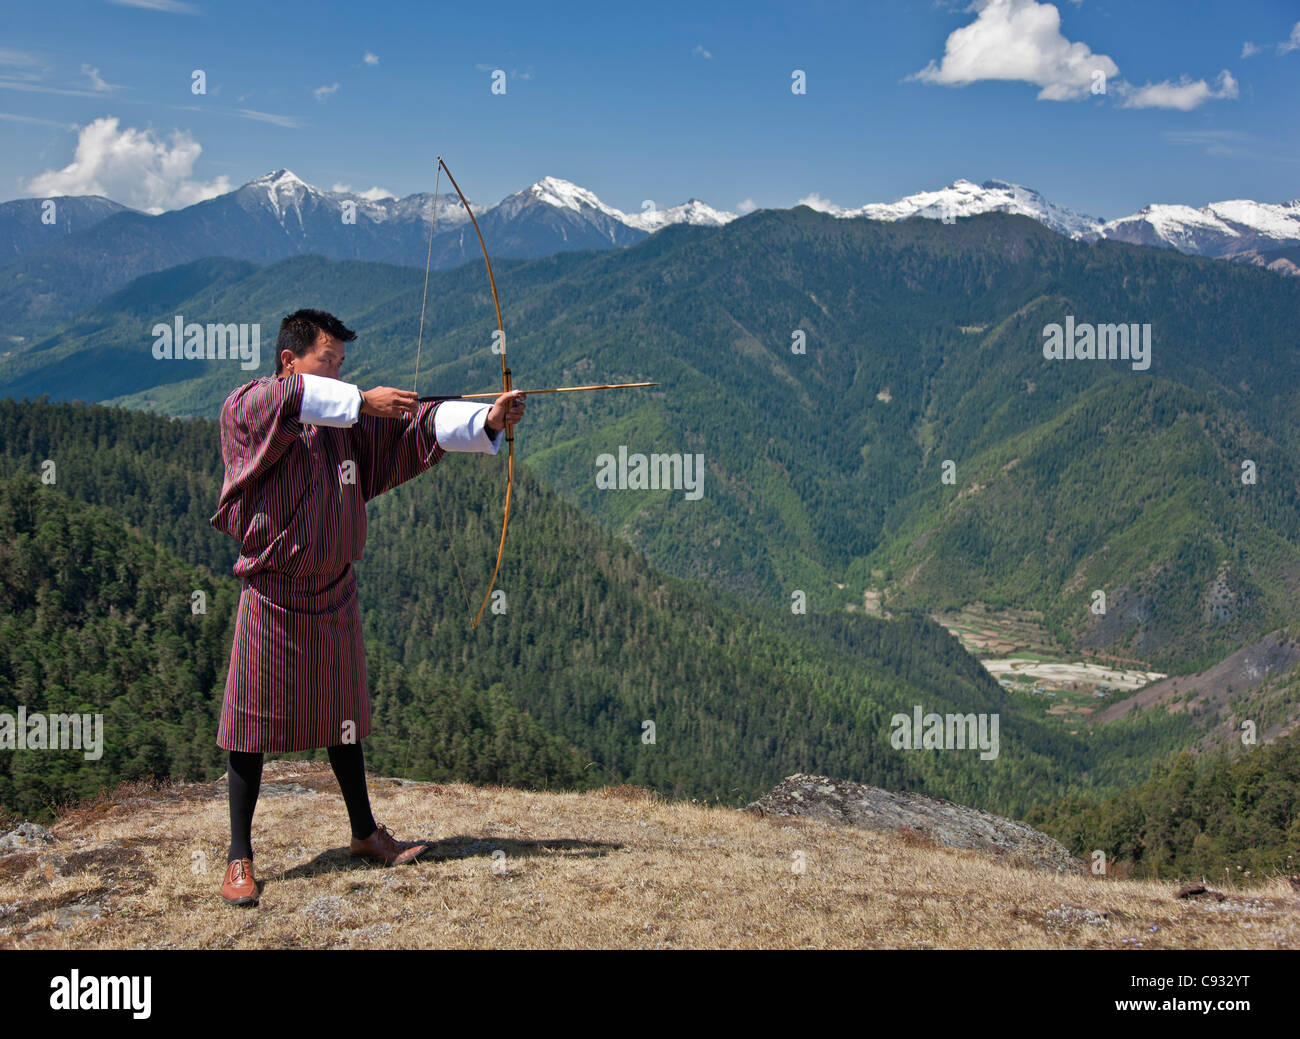 Archery, datse, is a favourite national sport of the Bhutanese. Here an Archer practices his skills on the high Cheli La Pass. Stock Photo